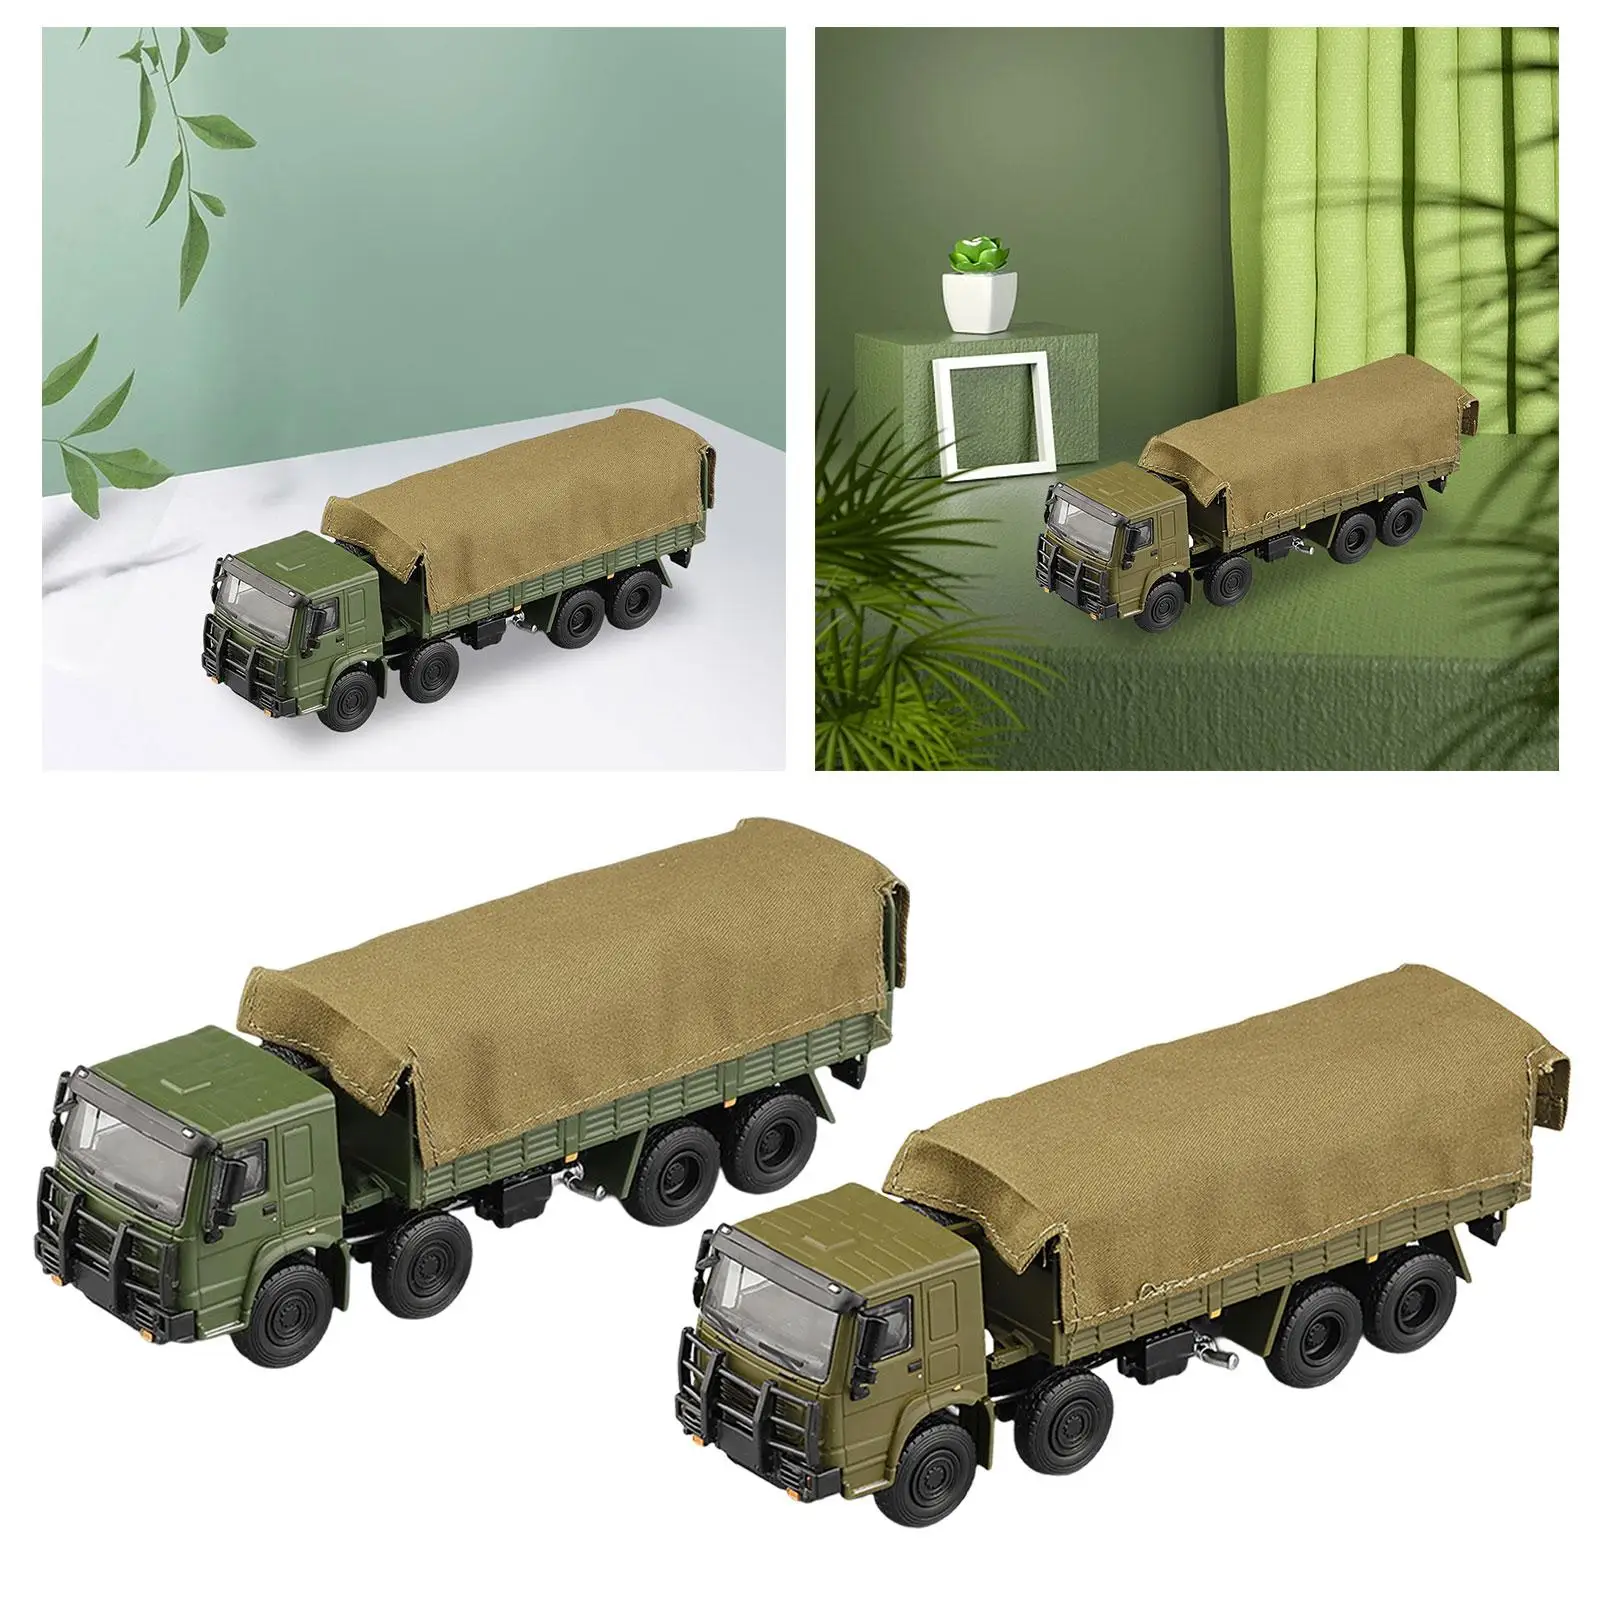 1:64 Diorama Street Car Model Sand Table Ornament Collectible Vehicles for Photography Props Diorama DIY Scene Layout Decor